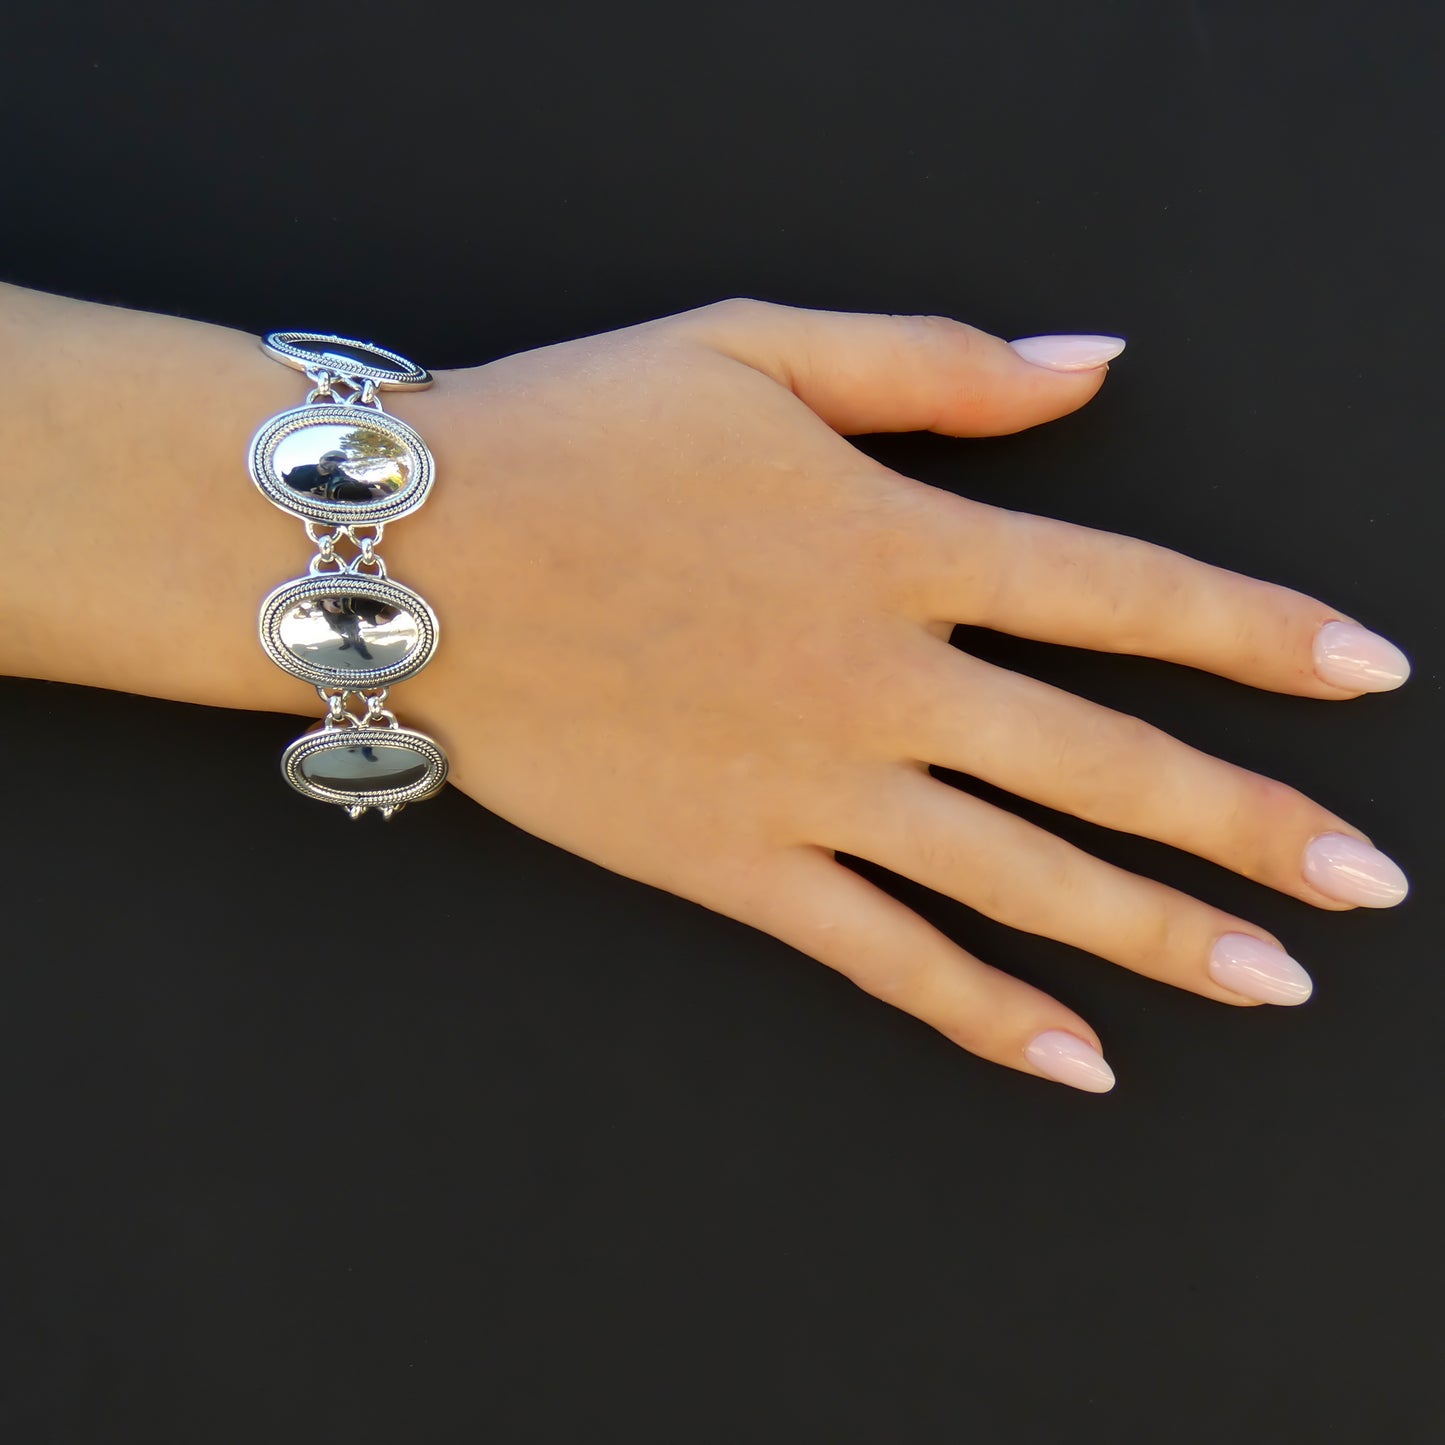 B165 KASI .925 Sterling Silver Bracelet with Low Dome Links and Rope Trim